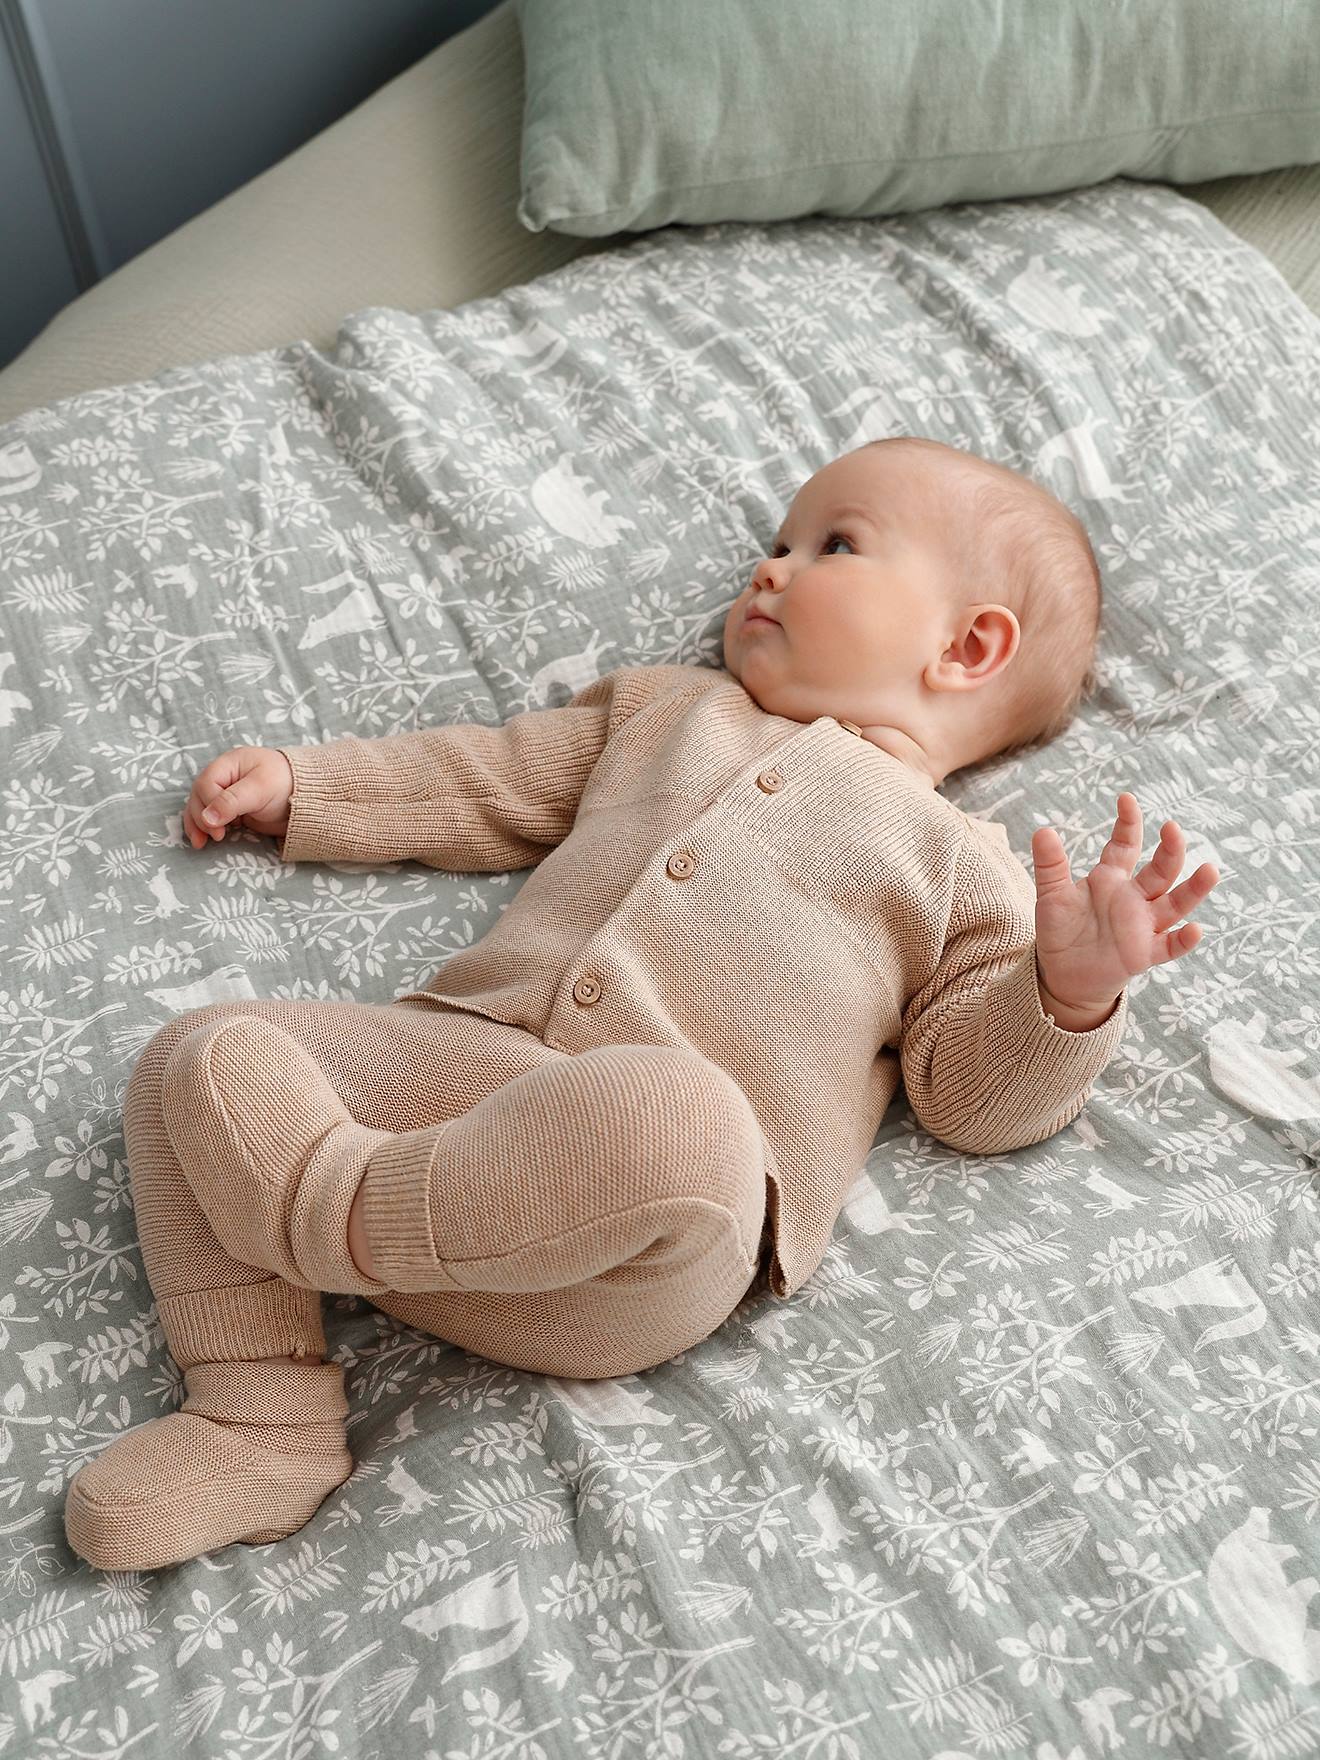 Newborn Infant Baby Girl Boy Outfits Fall Winter Clothes Set Knit Long  Sleeve Romper Top Long Pant - Walmart.com